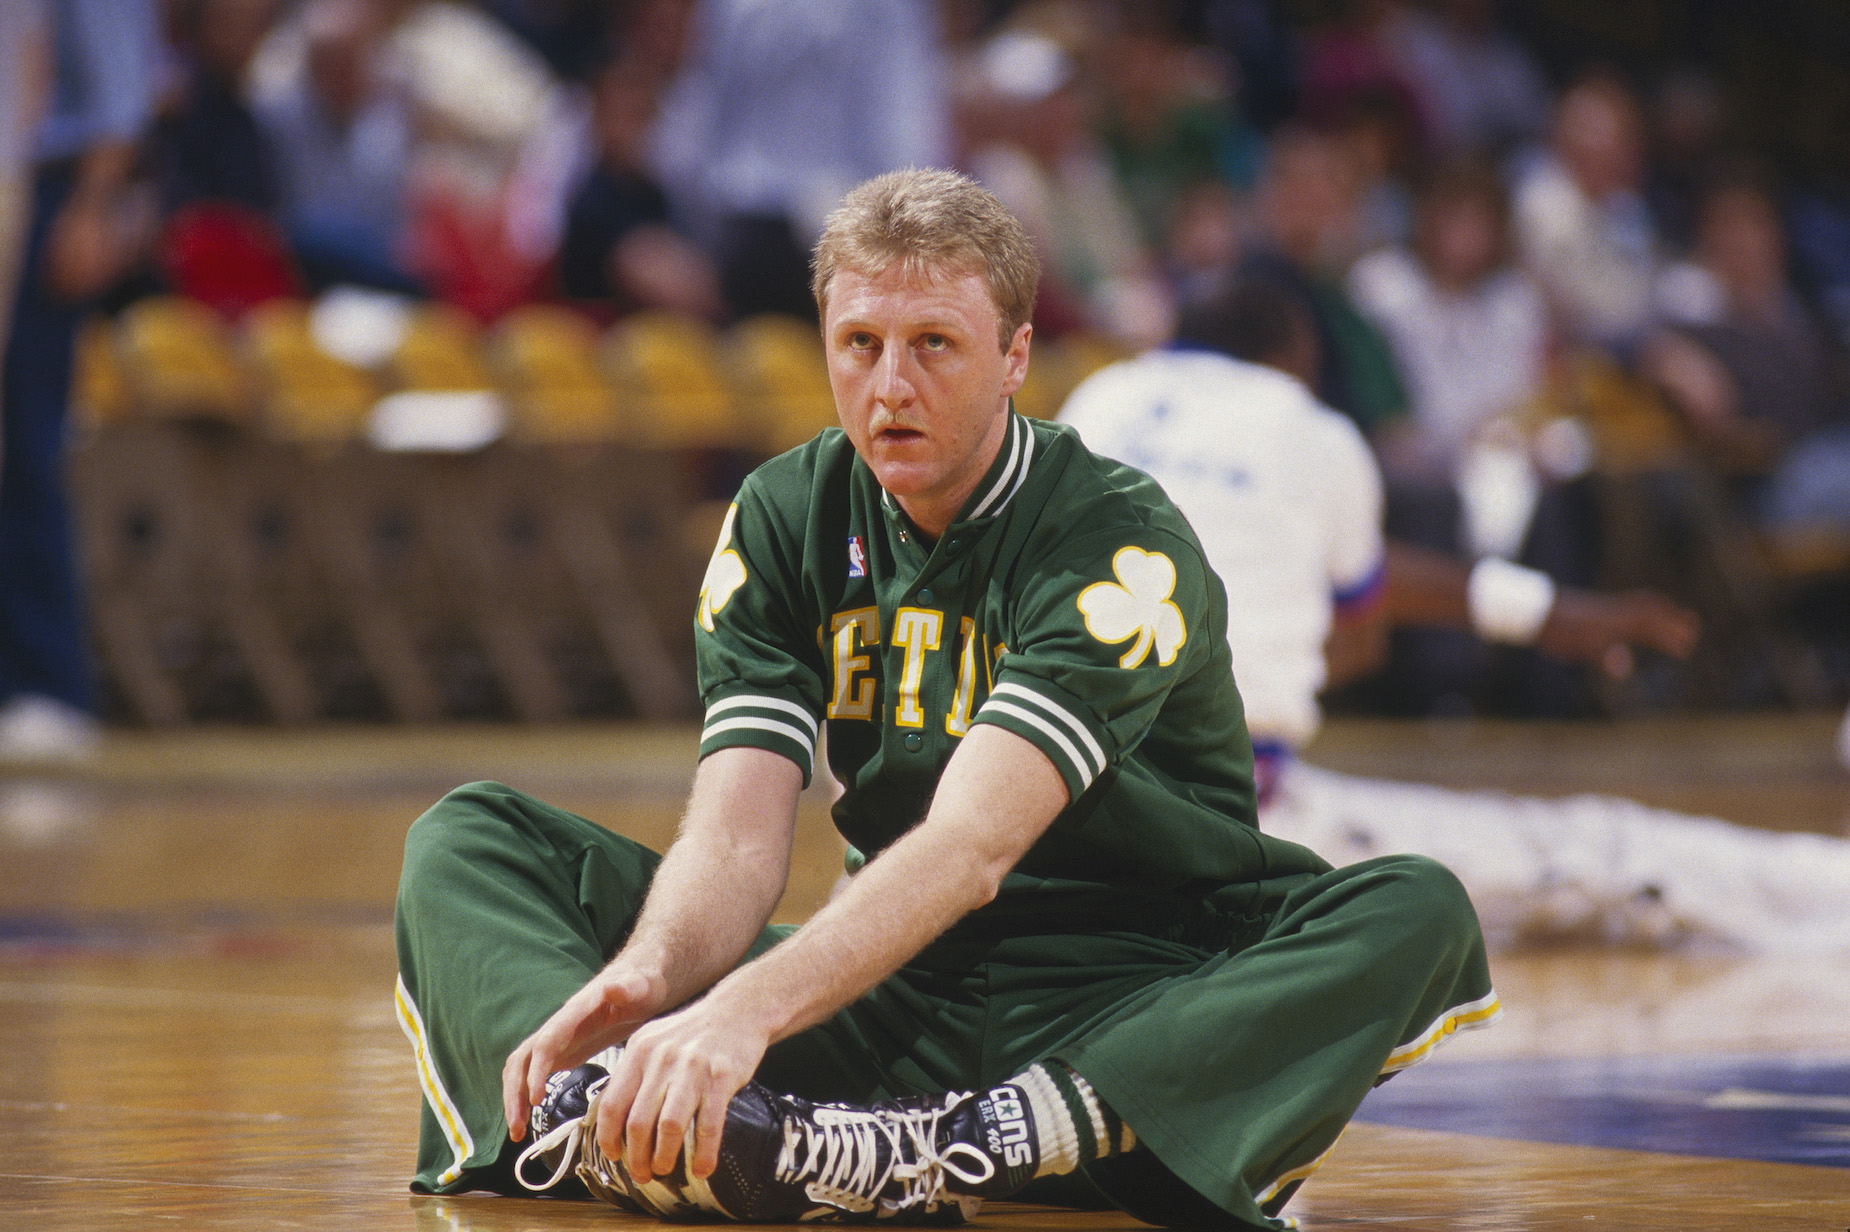 During his rookie season with the Boston Celtics, Larry Bird made it clear that he had no time for hazing.